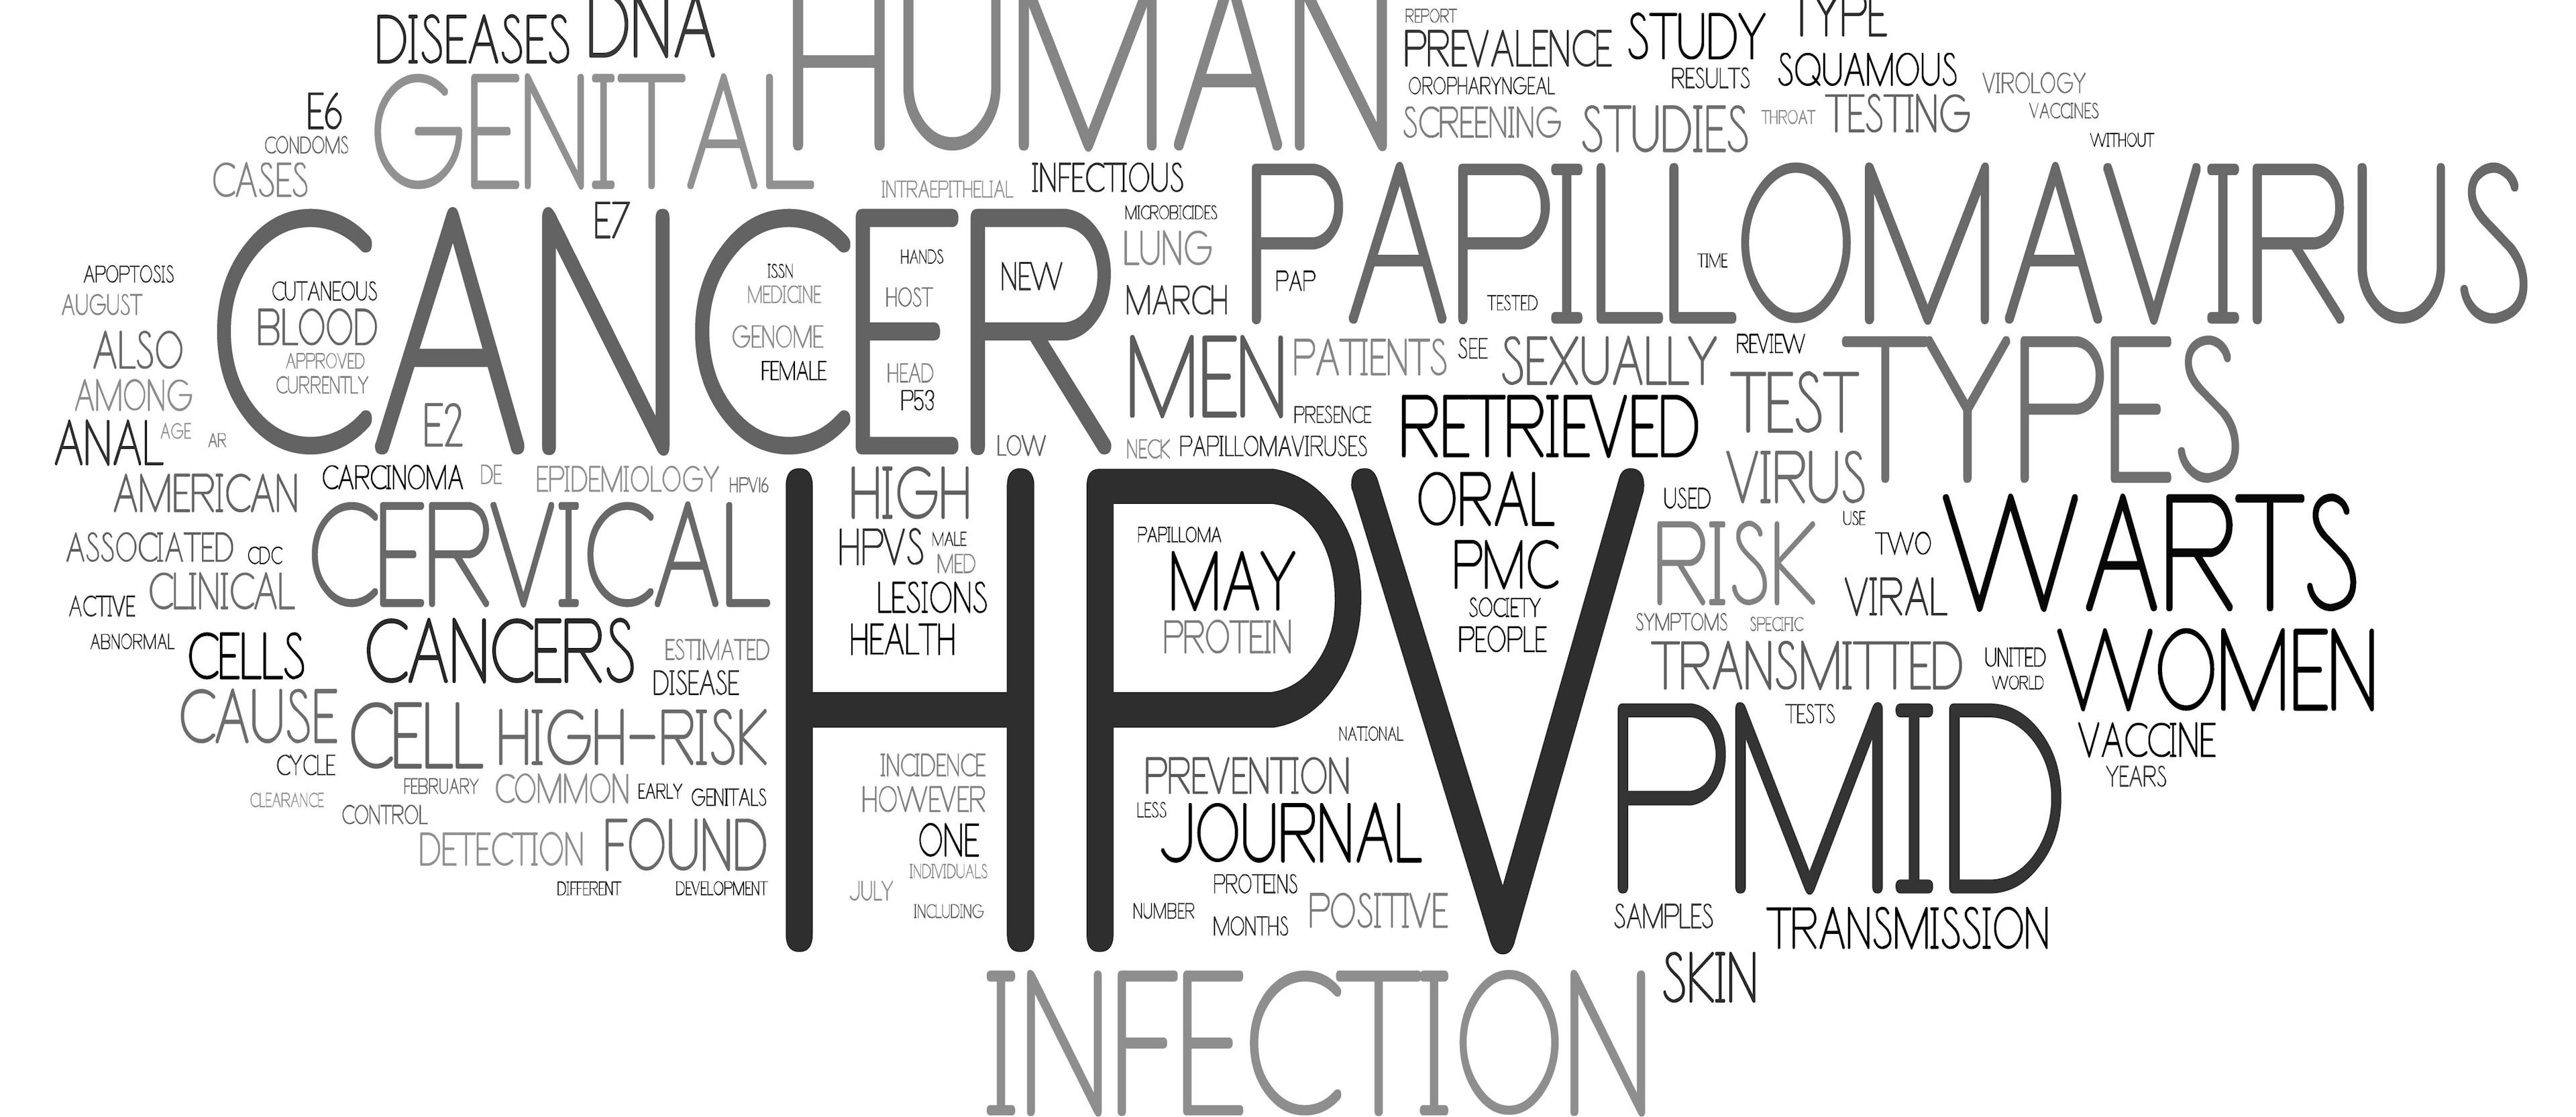 Target Populations for HPV Vaccination